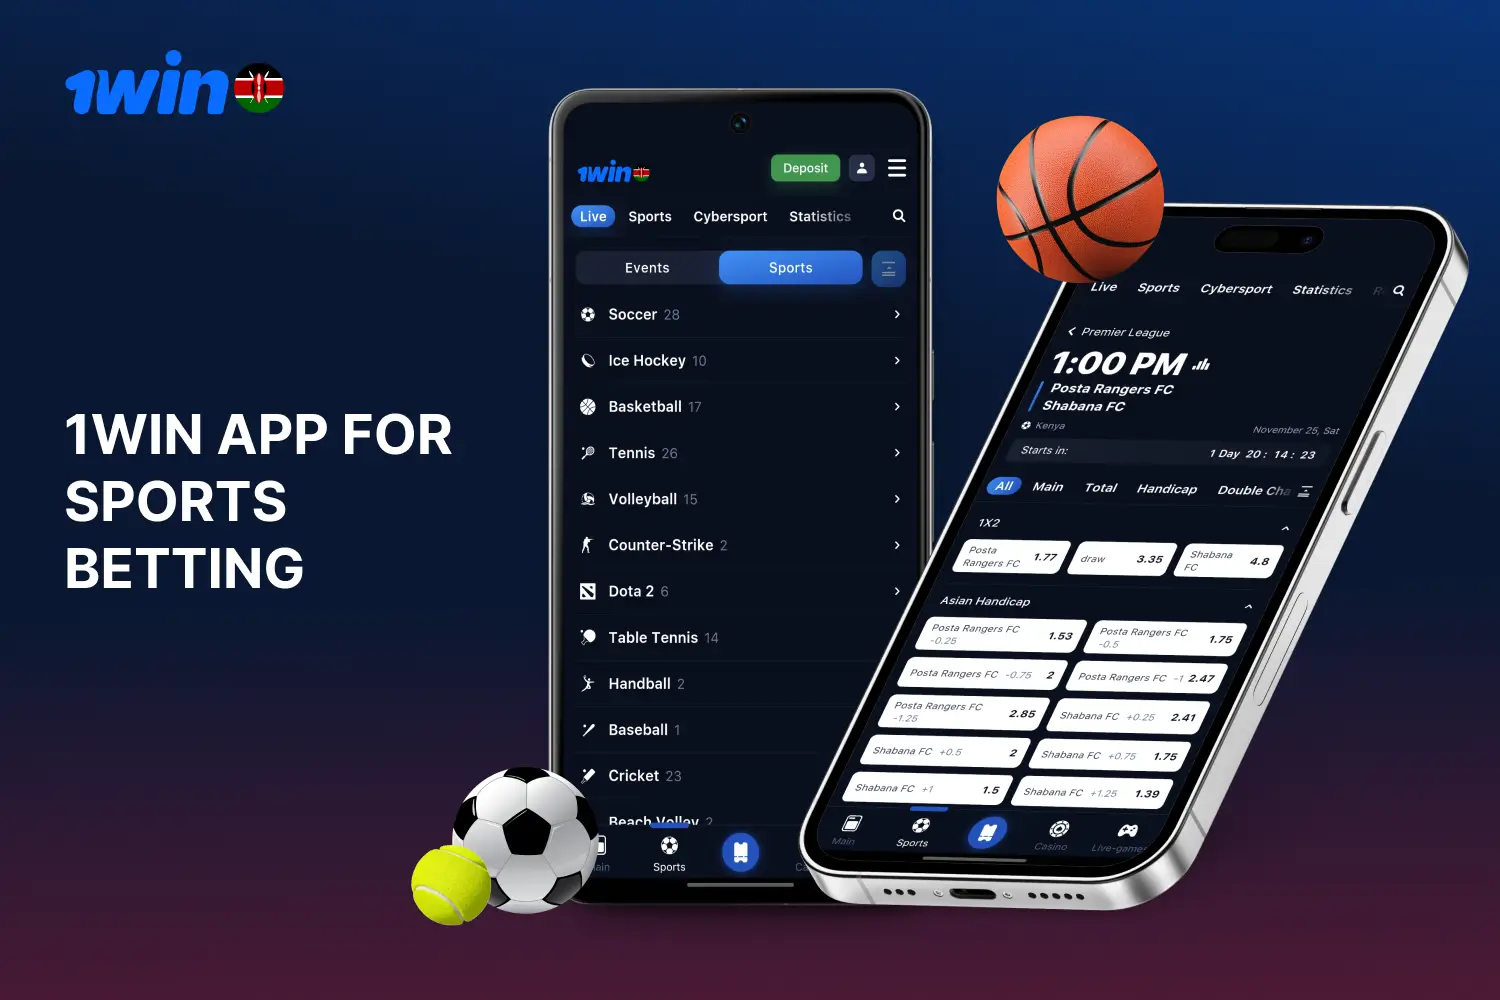 On the 1win mobile app, Kenyan bettors can bet on popular sports disciplines including cybersports